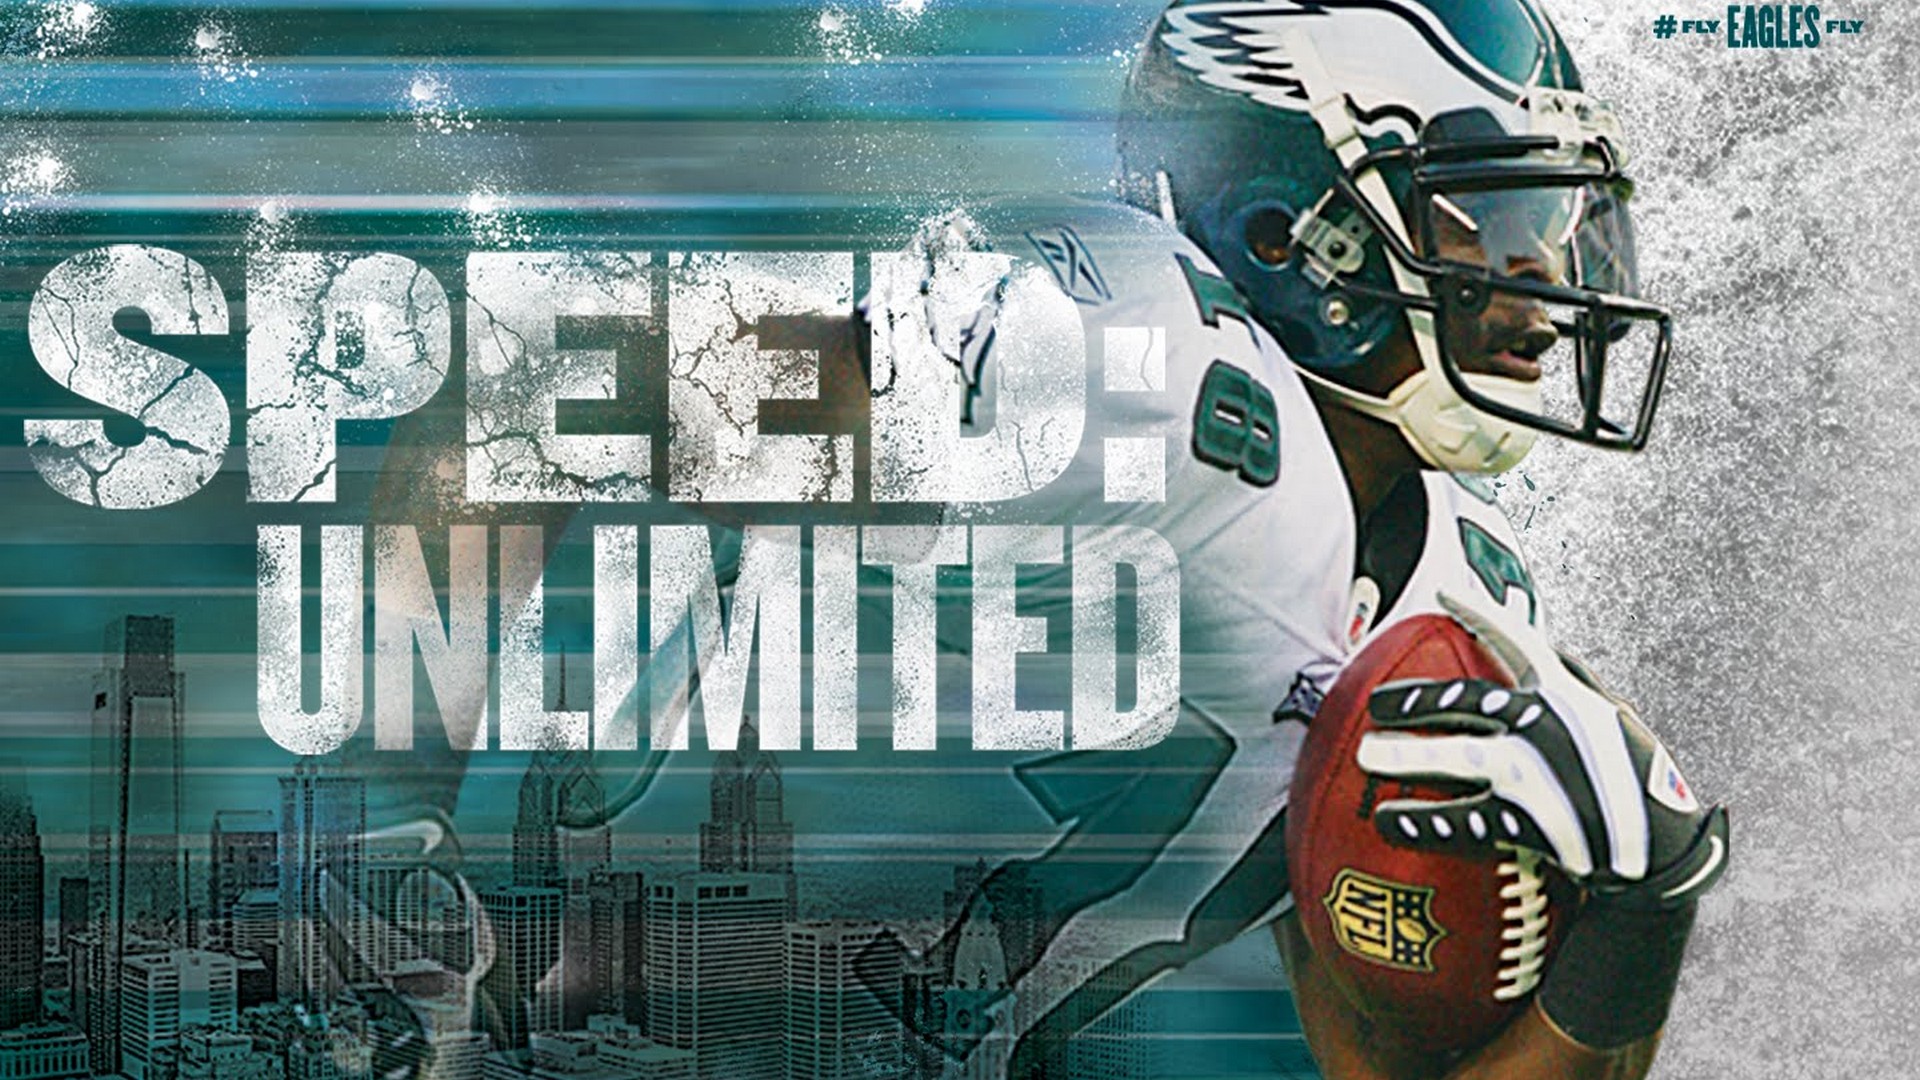 Windows Wallpaper NFL Eagles with resolution 1920x1080 pixel. You can make this wallpaper for your Mac or Windows Desktop Background, iPhone, Android or Tablet and another Smartphone device